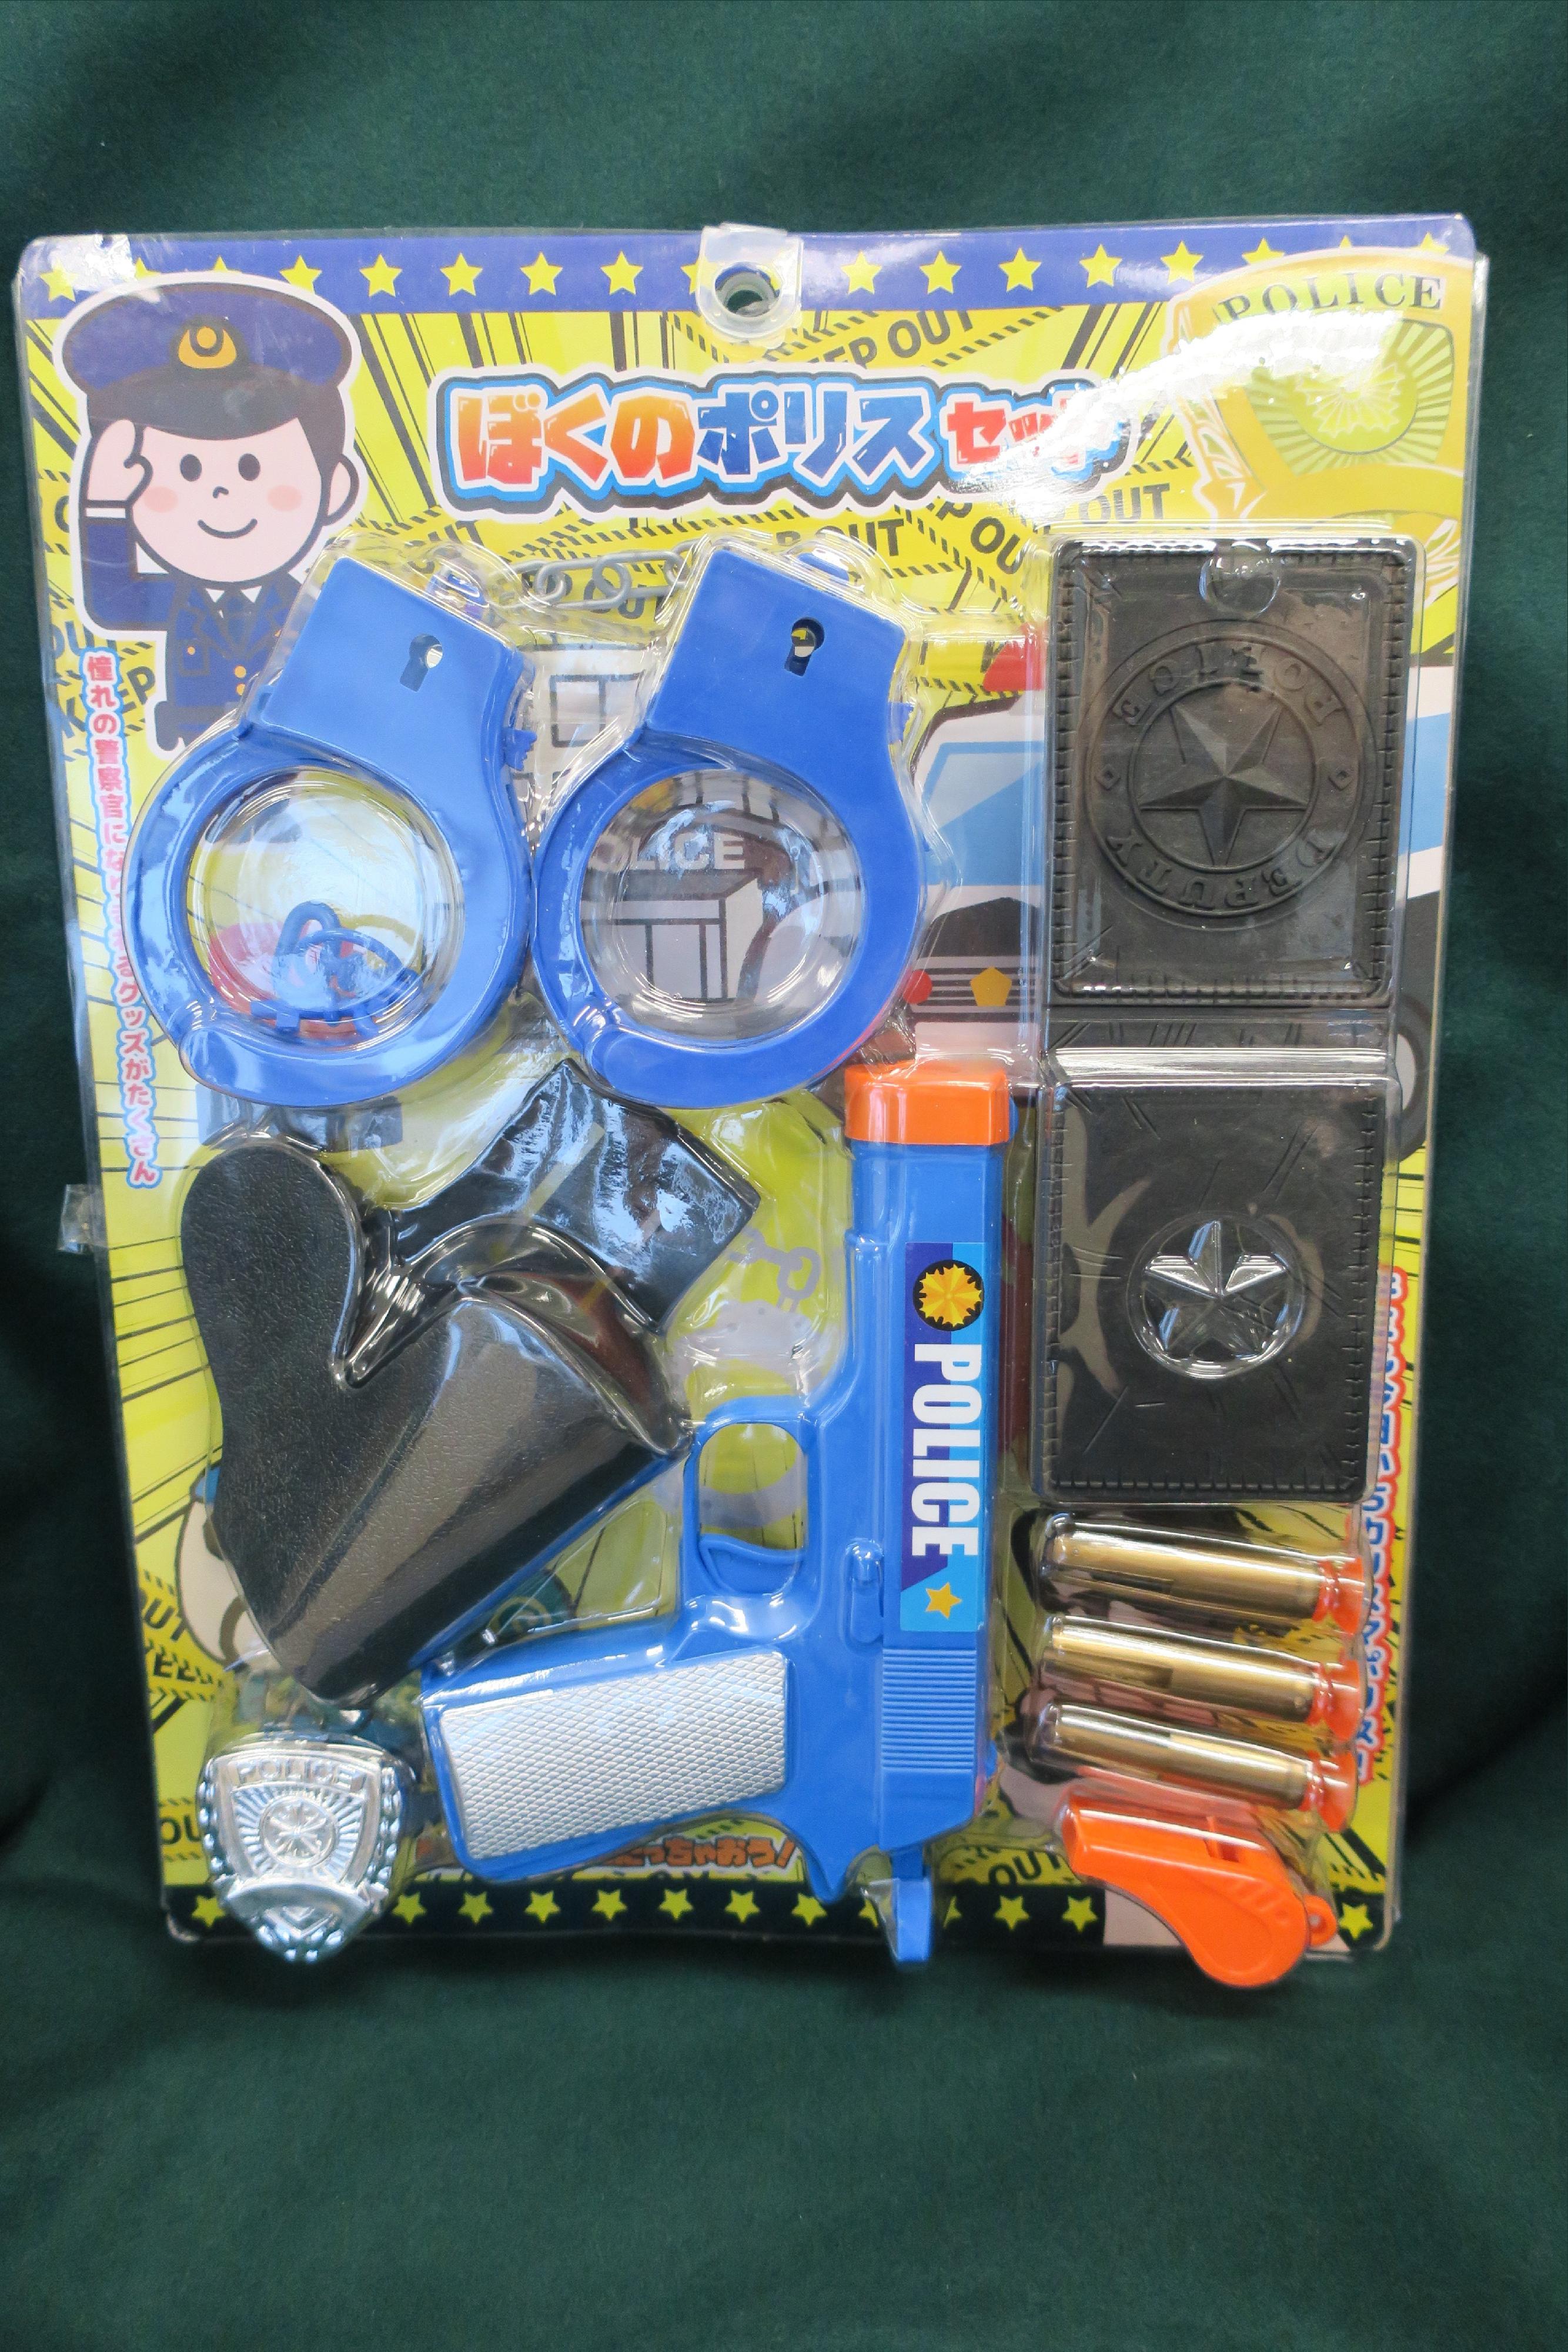 Hong Kong Customs today (September 22) reminded members of the public to stay alert to an unsafe model of a toy gun set. Test results indicated that the toy gun and its whistle accessory might pose a safety hazard. Photo shows the toy set concerned.

